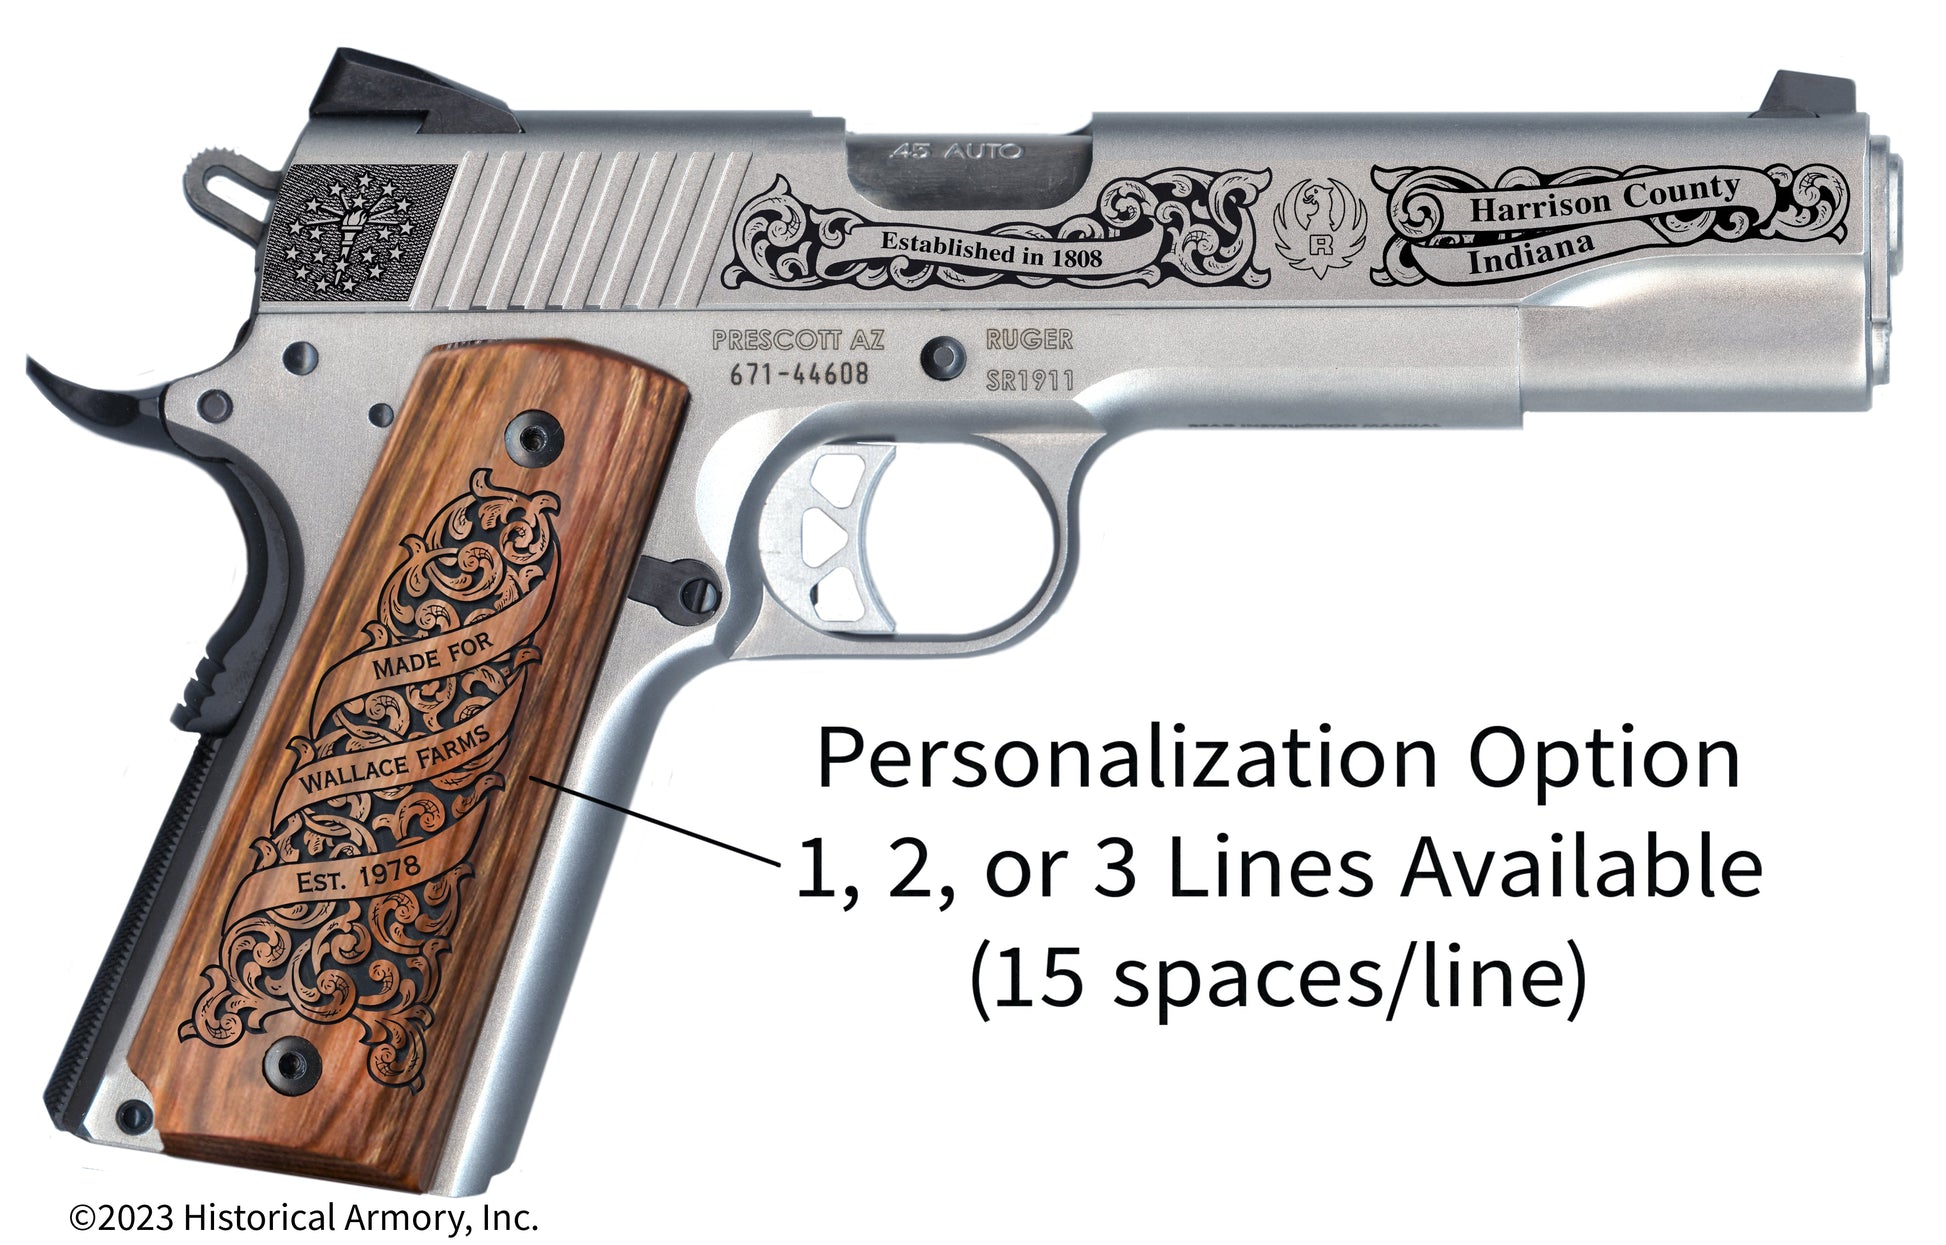 Harrison County Indiana Personalized Engraved .45 Auto Ruger 1911